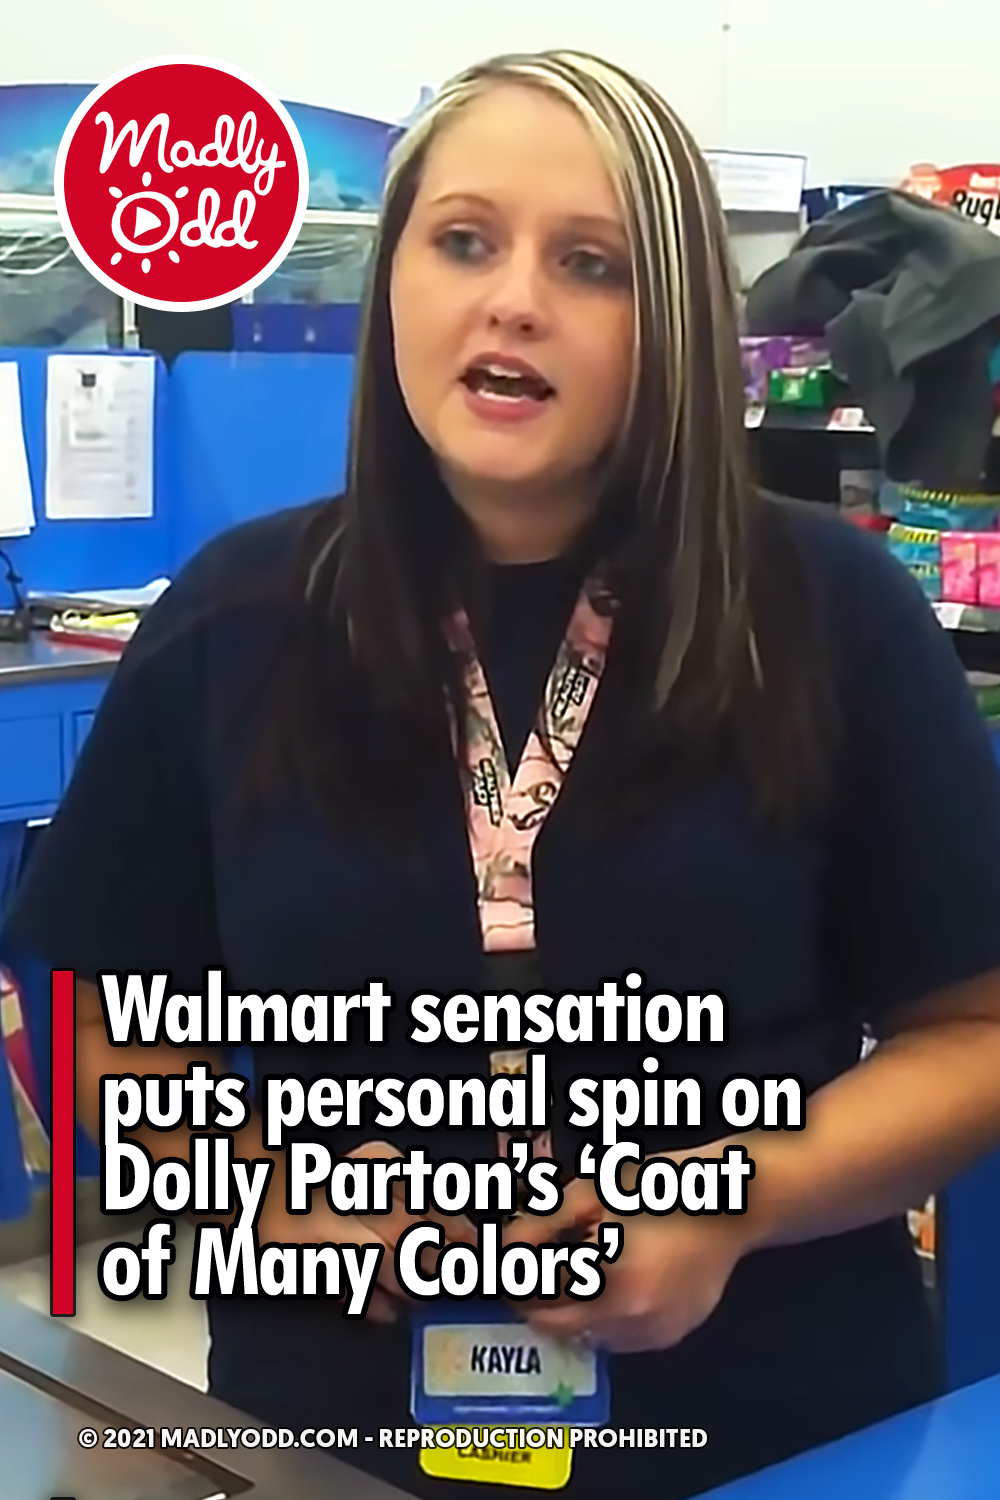 Walmart sensation puts personal spin on Dolly Parton’s ‘Coat of Many Colors’